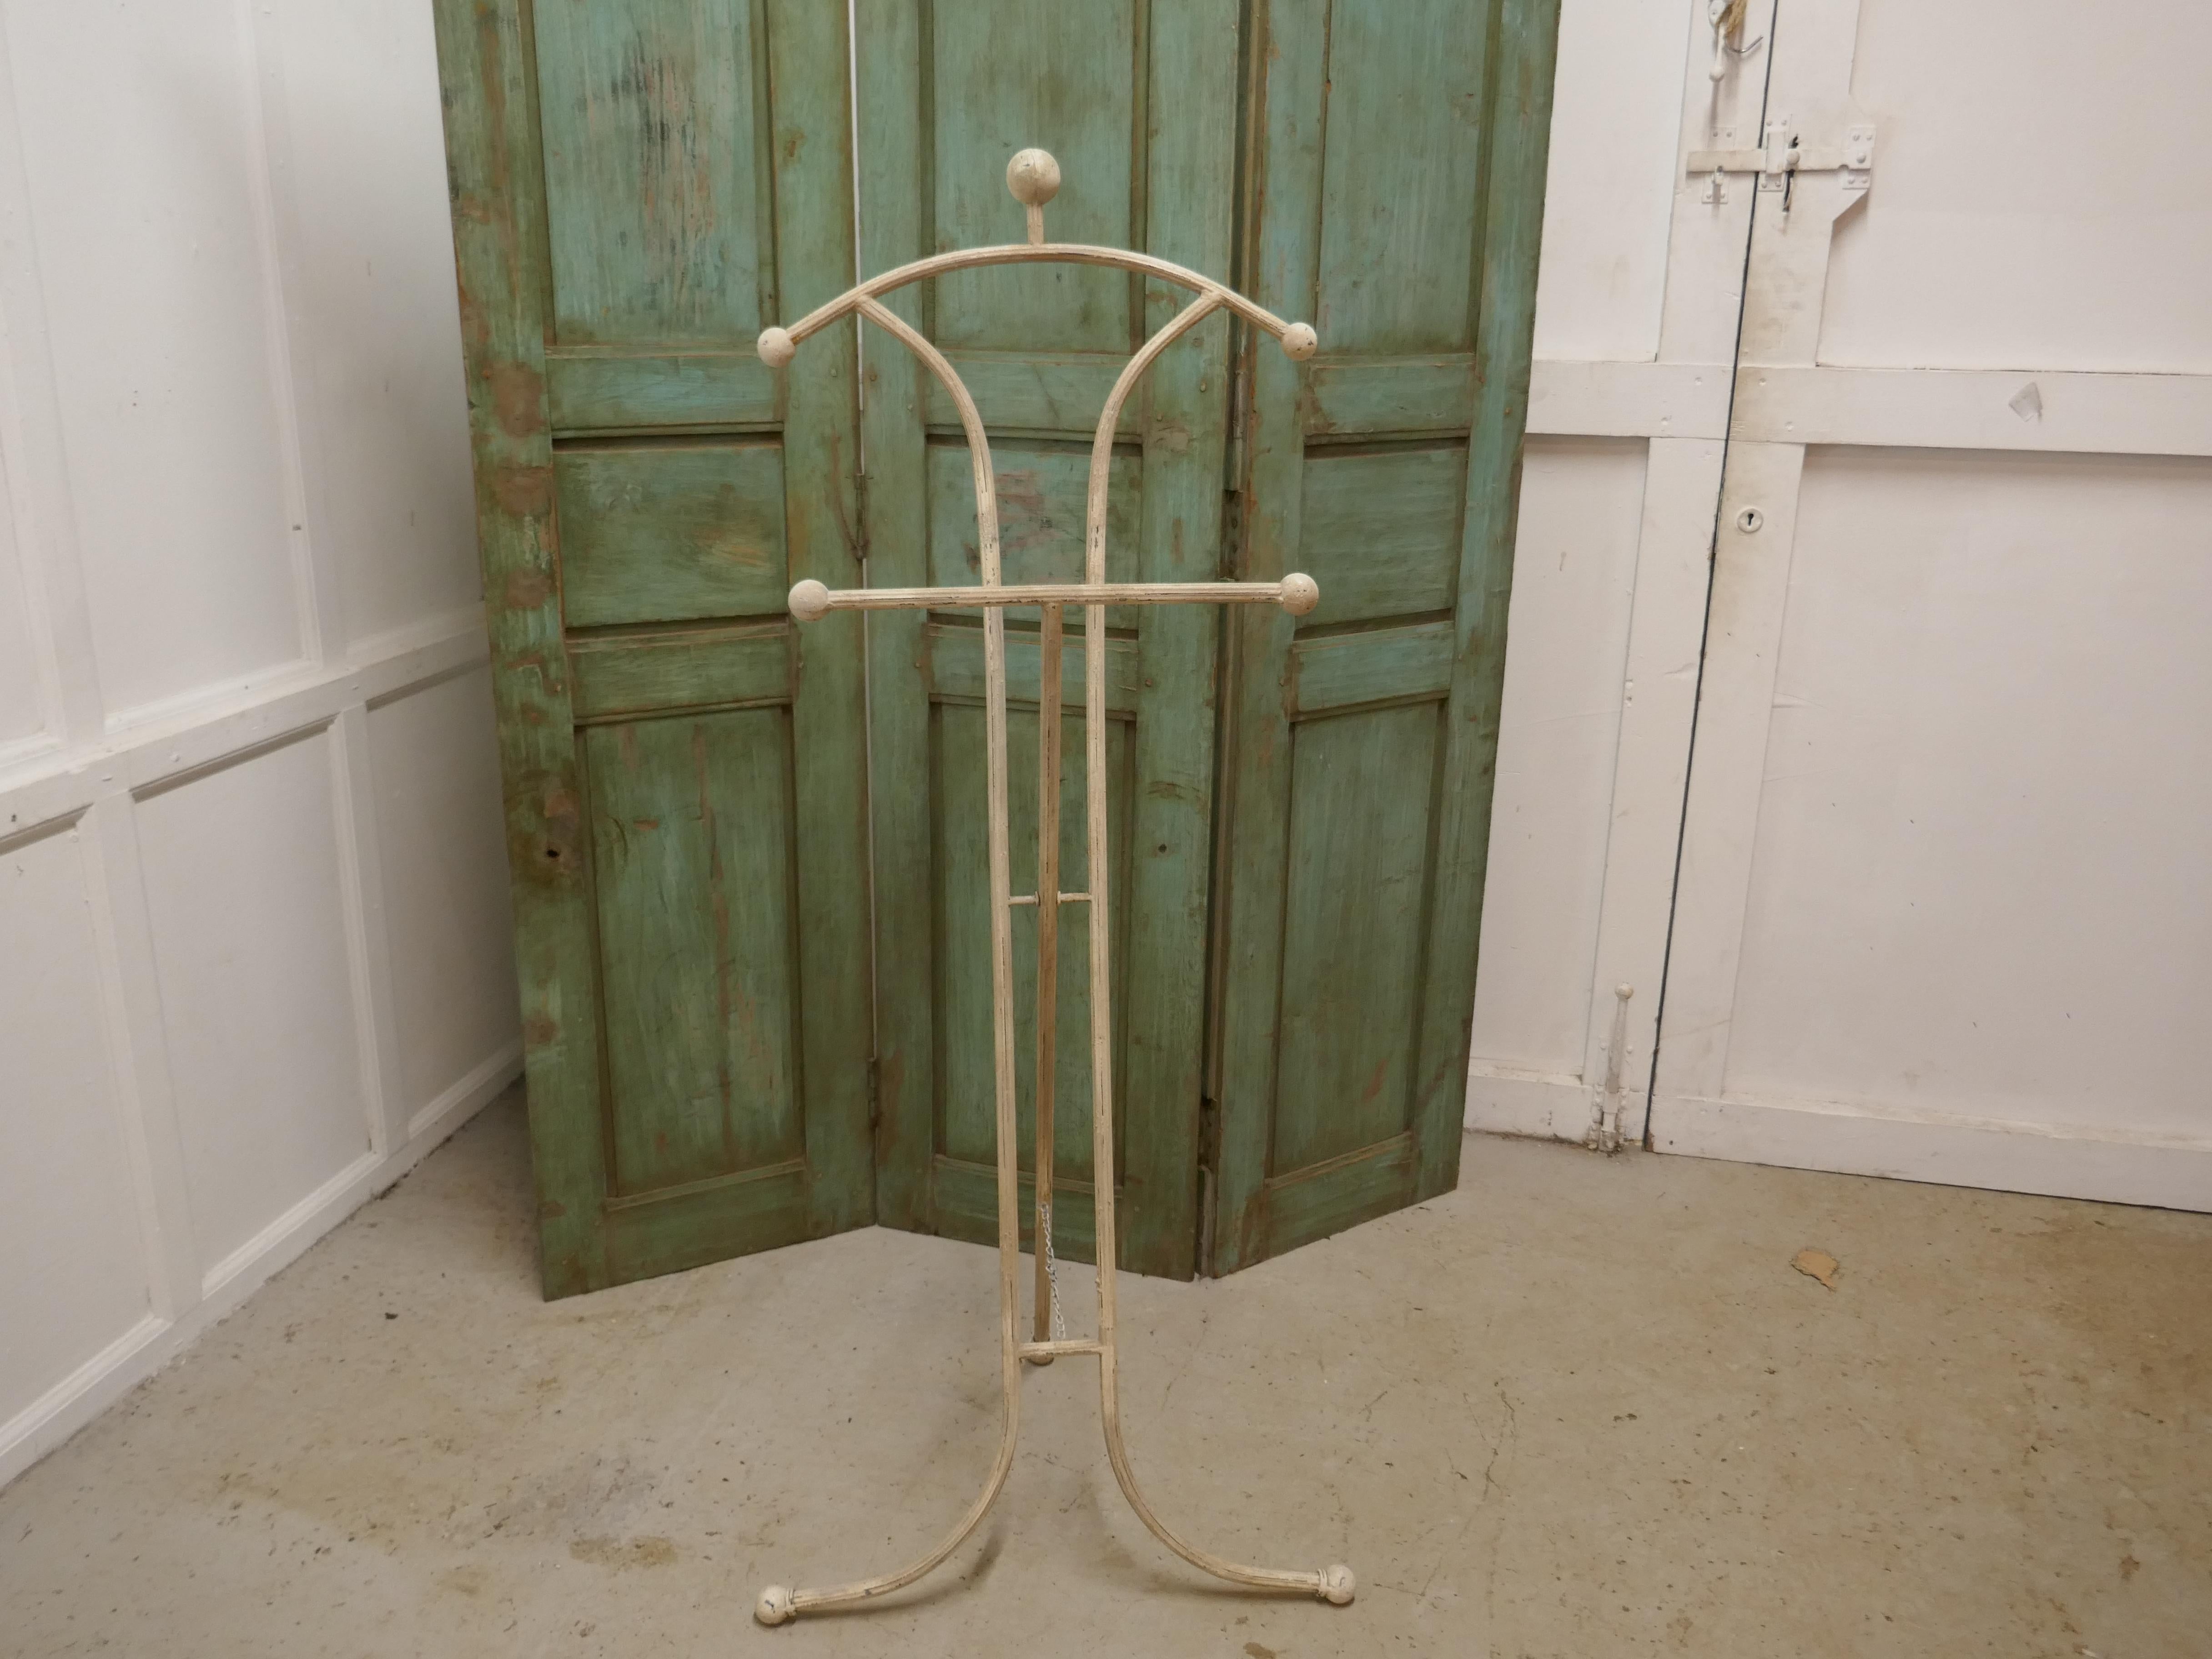 Unusual floor standing suit hanger or dumb valet

A very useful piece, the hanger or clothes stand is painted shabby white, it will accommodate either jacket and trousers or even a dress and there is also a hat hanger, this would make an excellent